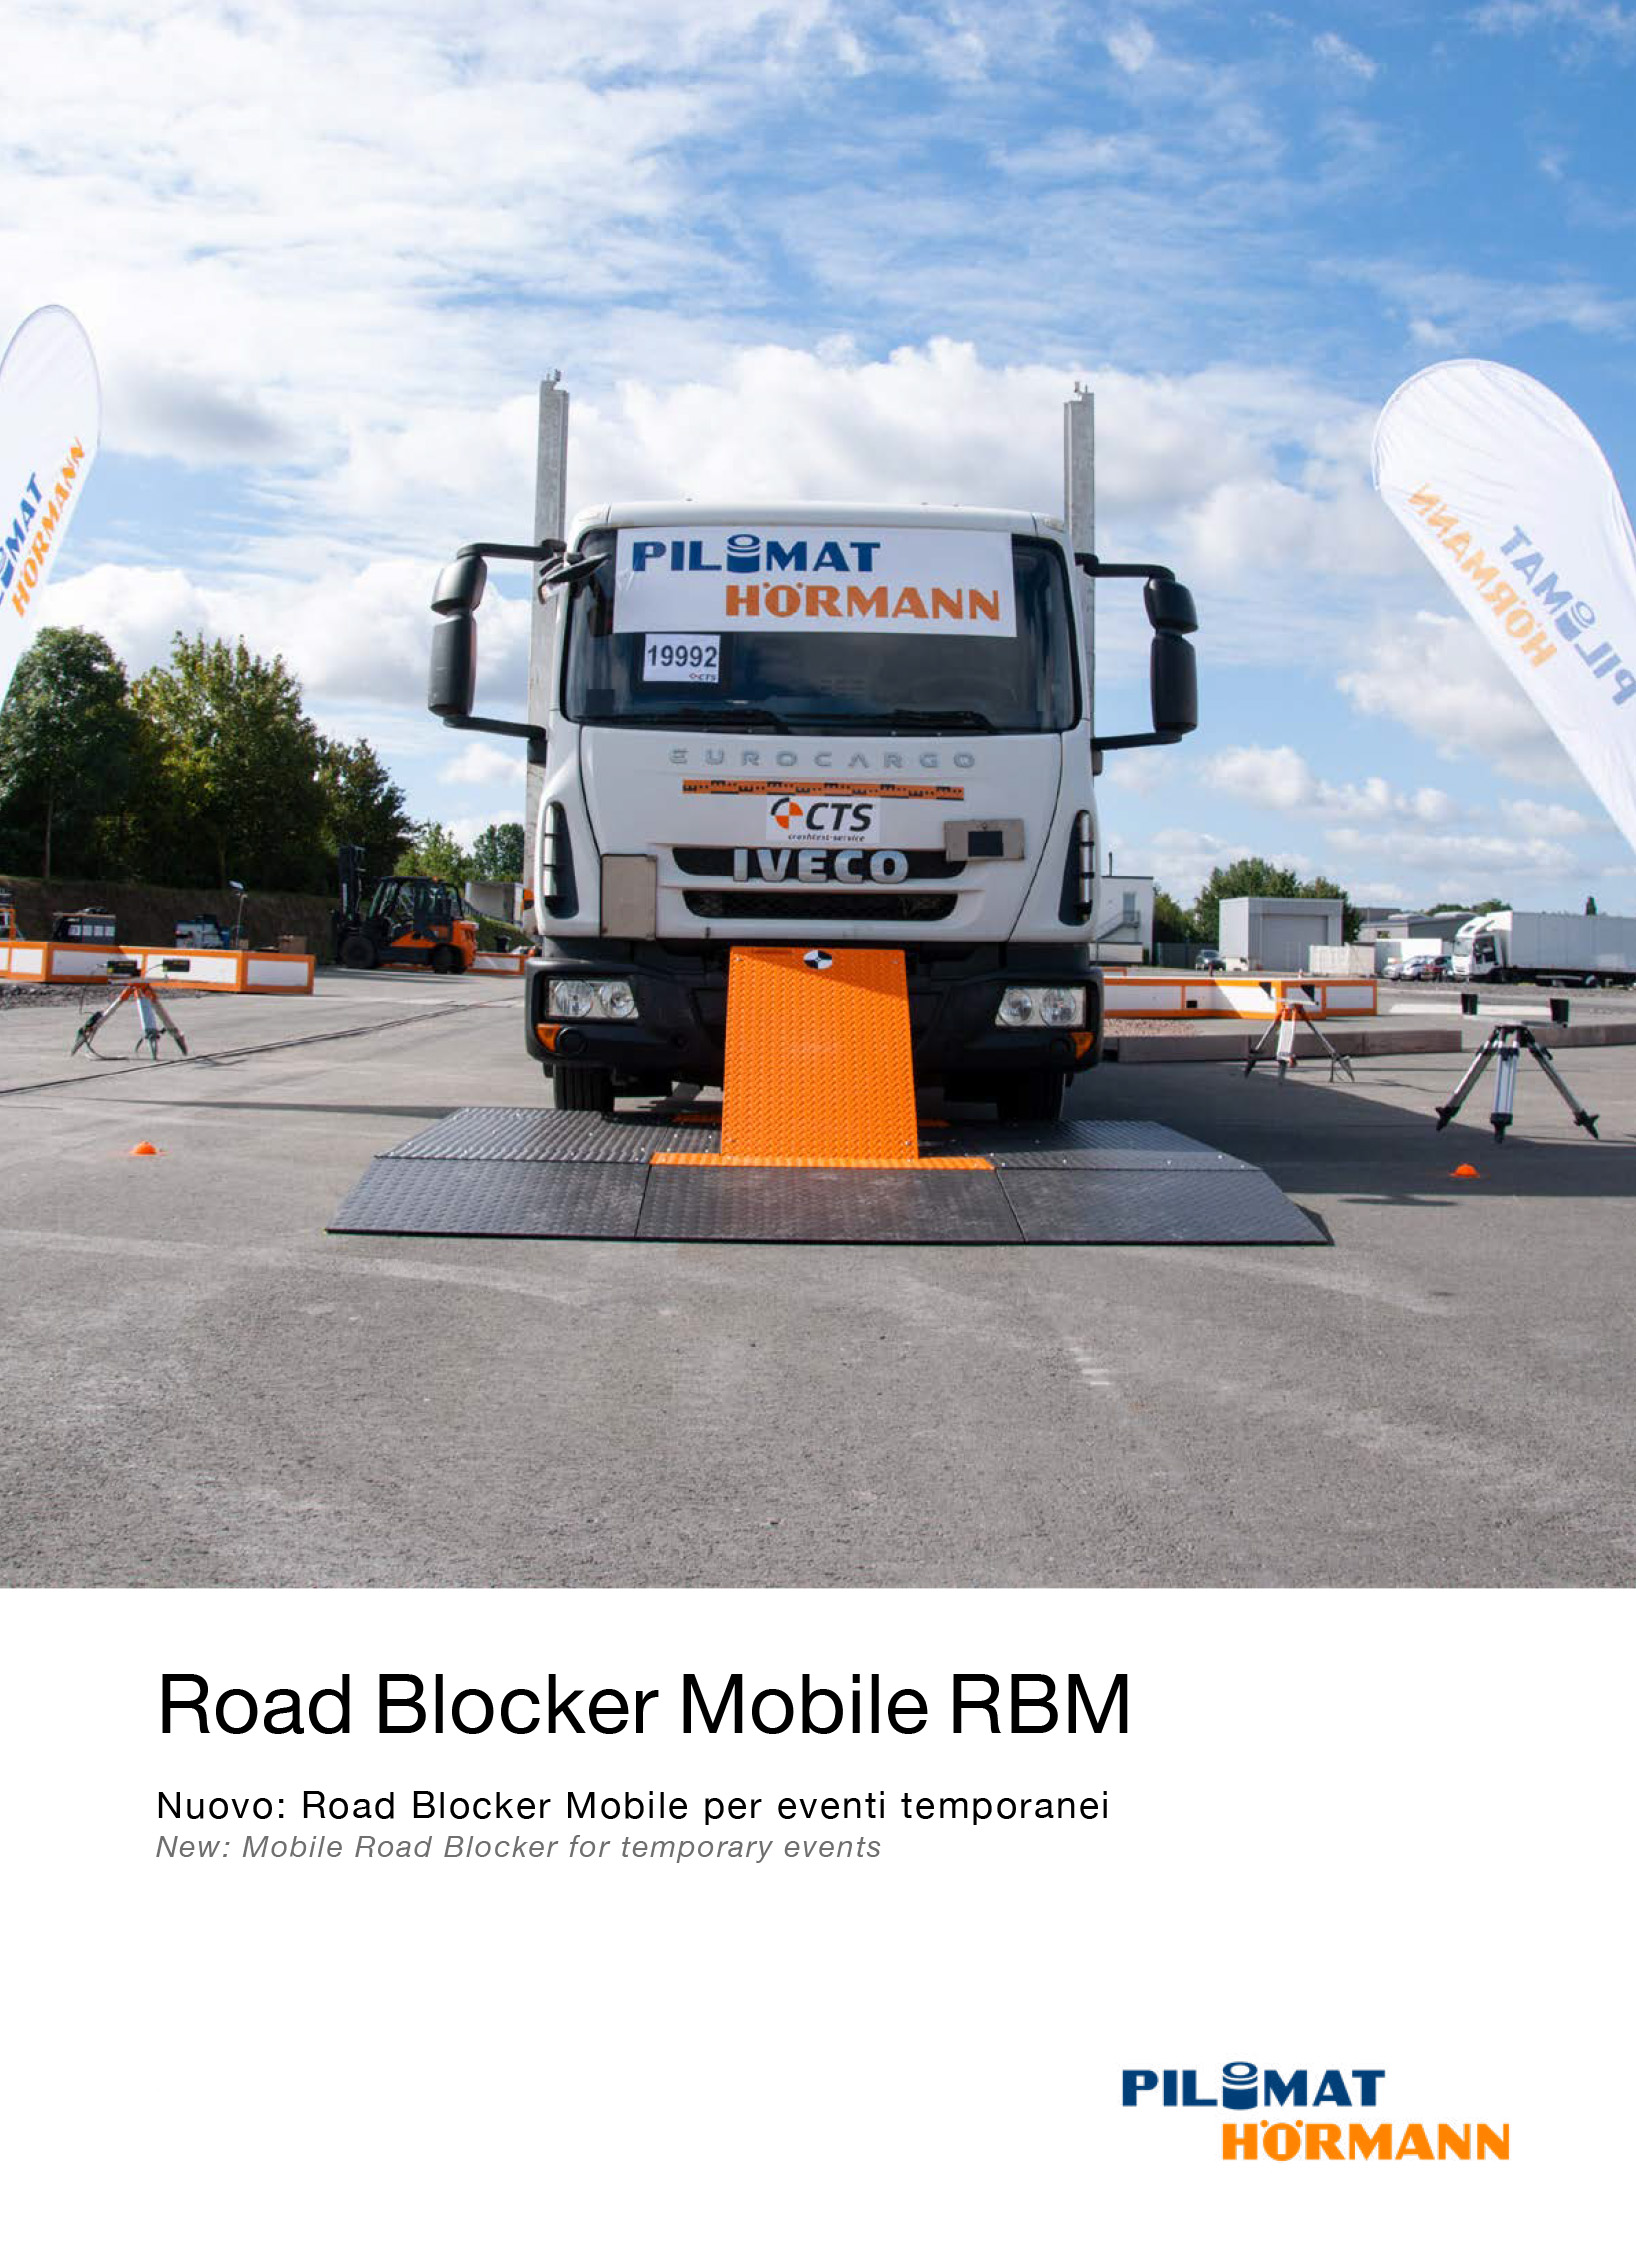 Cover page of the Pilomat Mobile Road Blocker